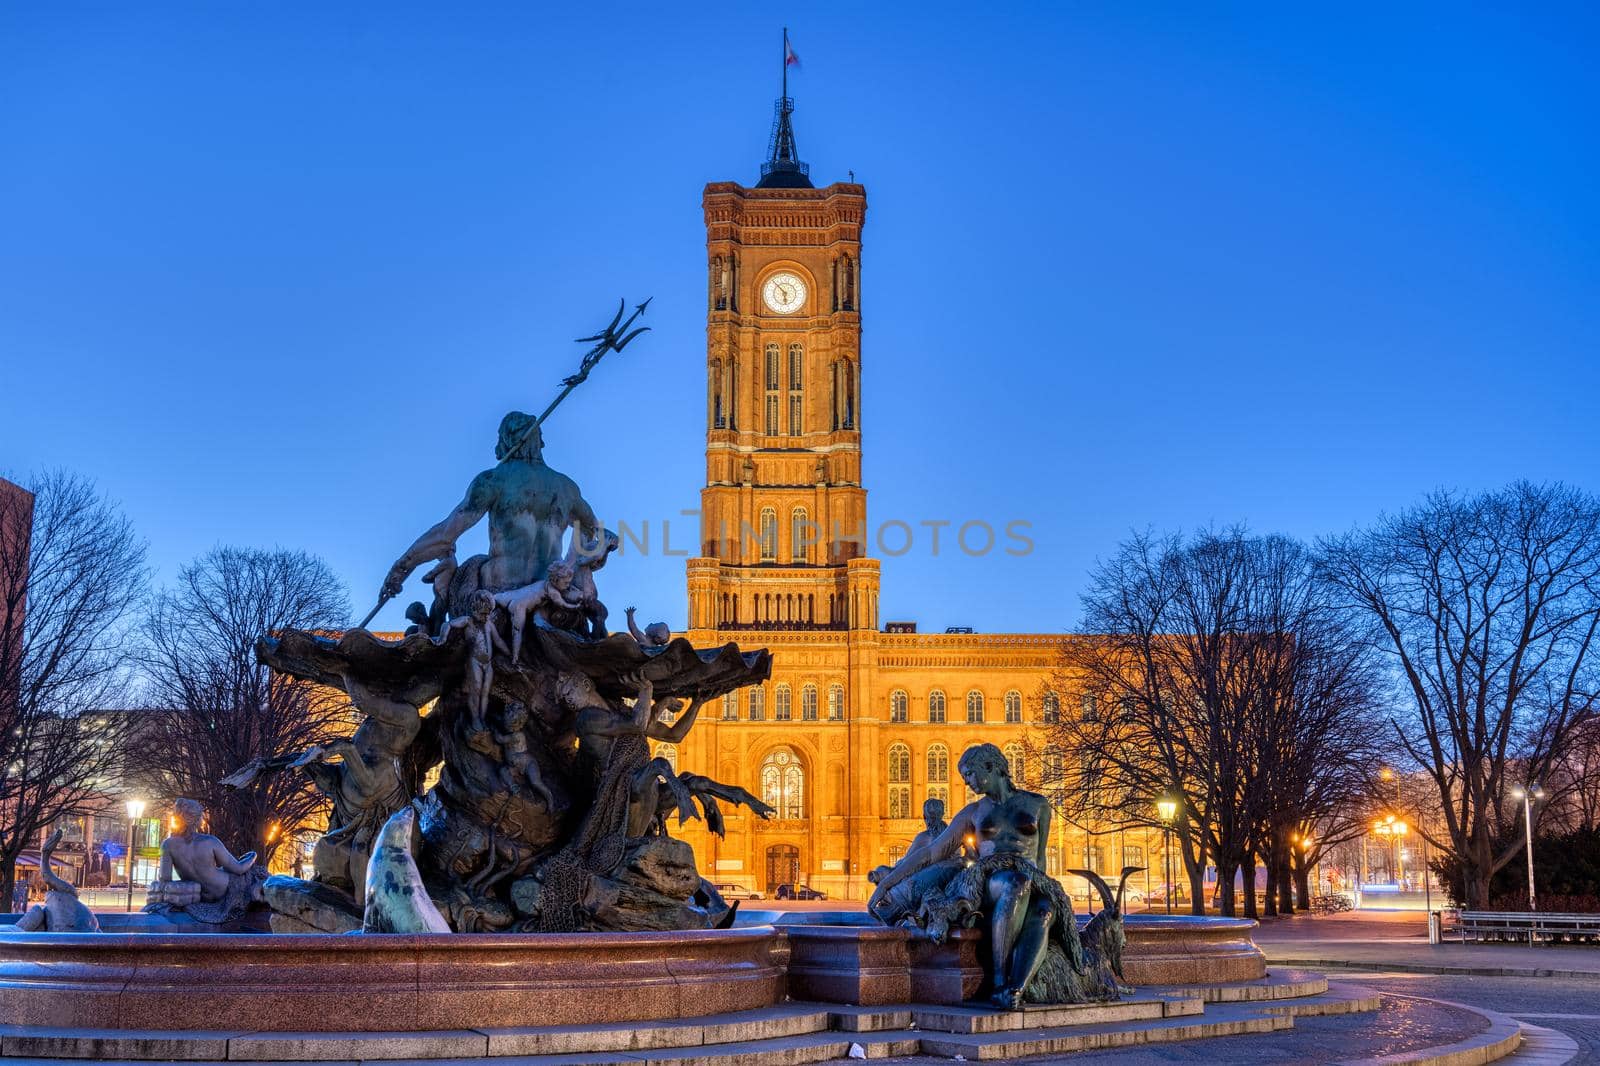 The famous Rotes Rathaus and the Neptune fountain in Berlin at twilight